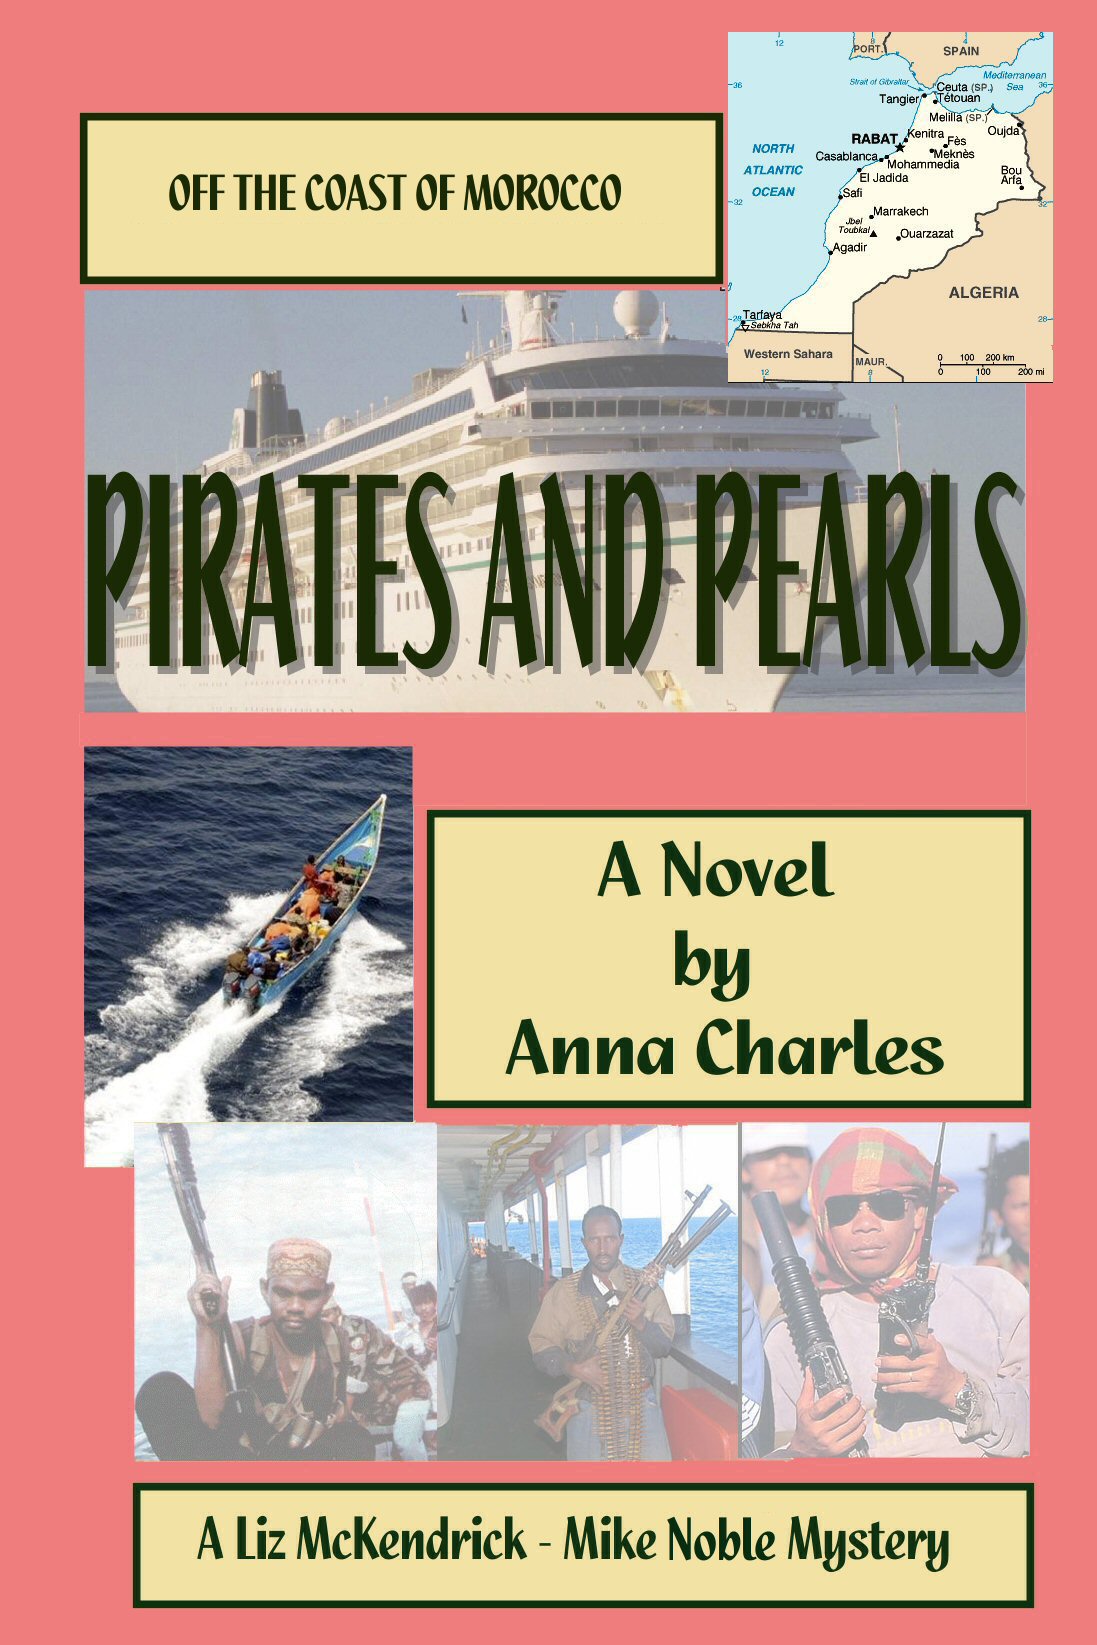 My Book Pirates and Pearls